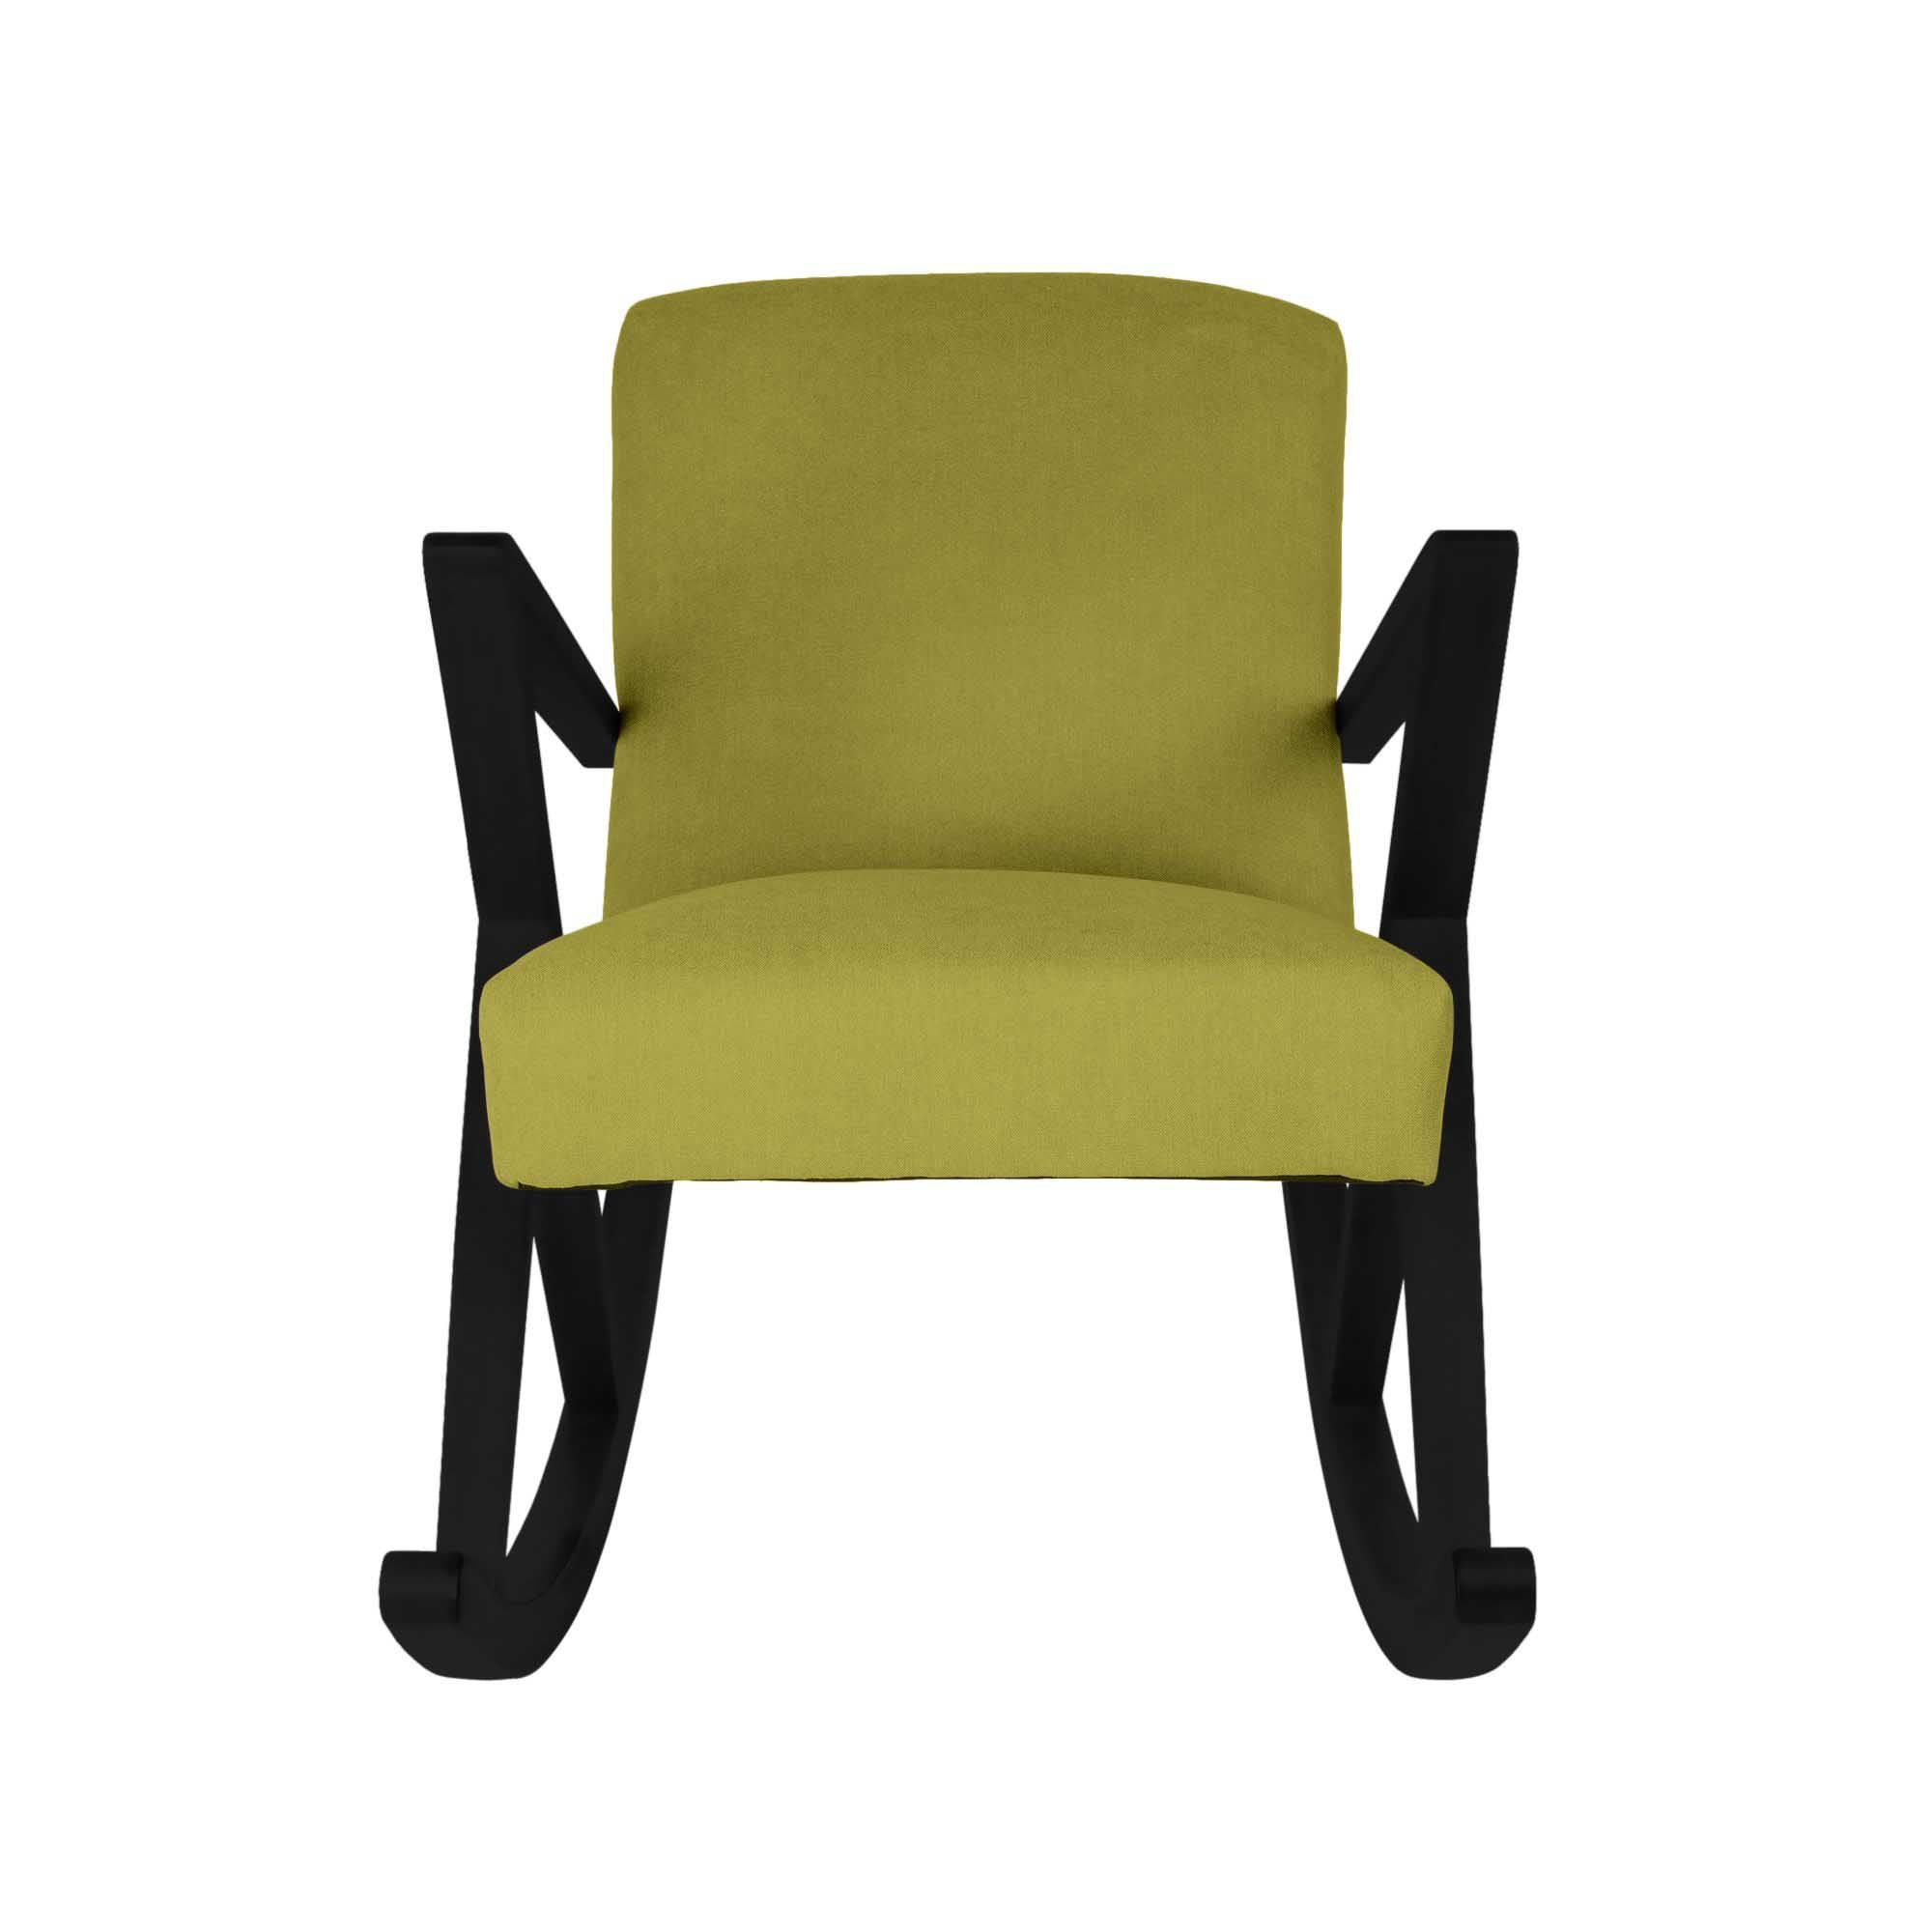 Rocking Chair, Beech Wood Frame, Black Lacquered green fabric, front view